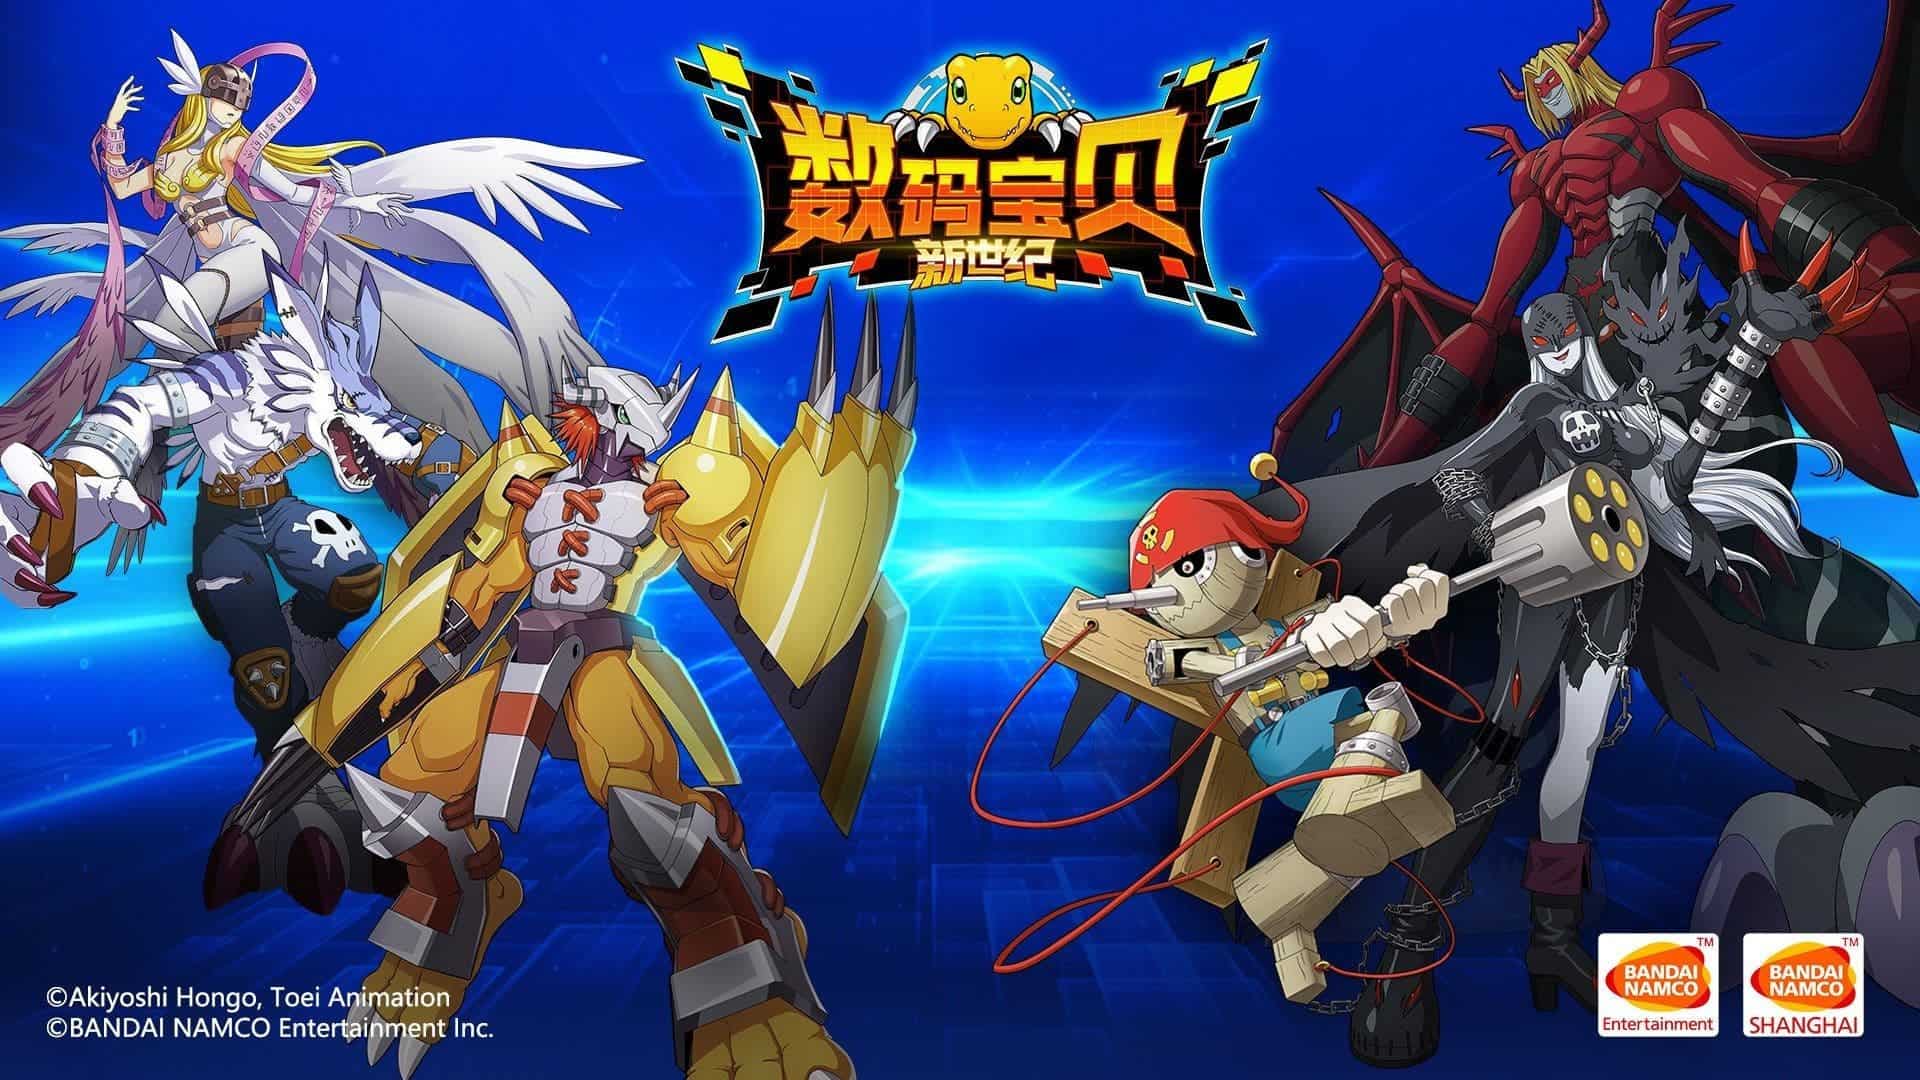 Digimon New Century is a new mobile game from Bandai Namco and Tencent